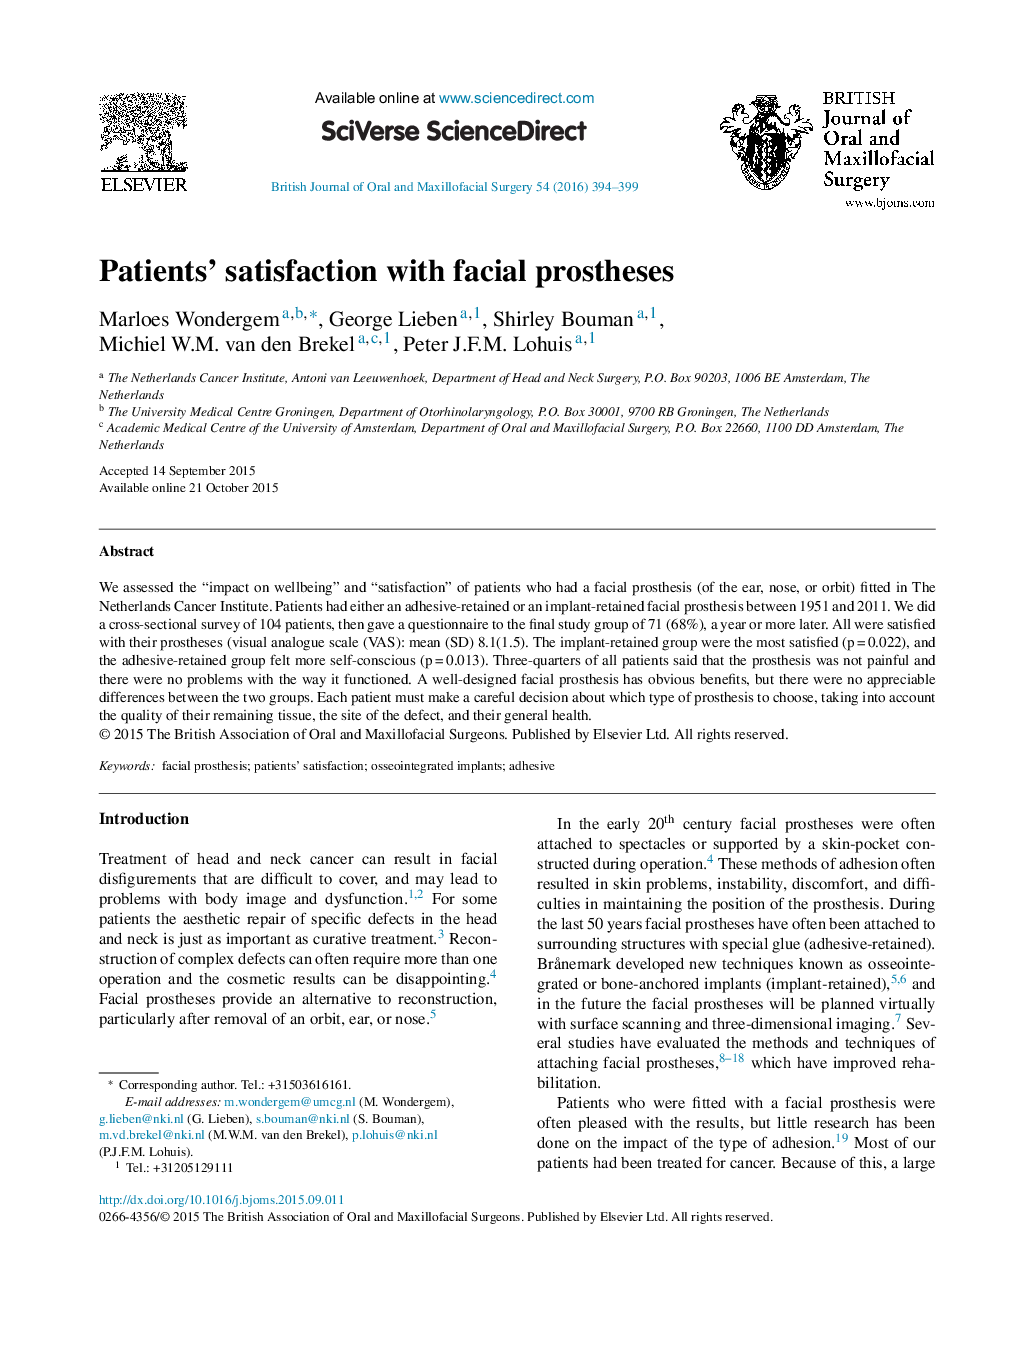 Patients’ satisfaction with facial prostheses